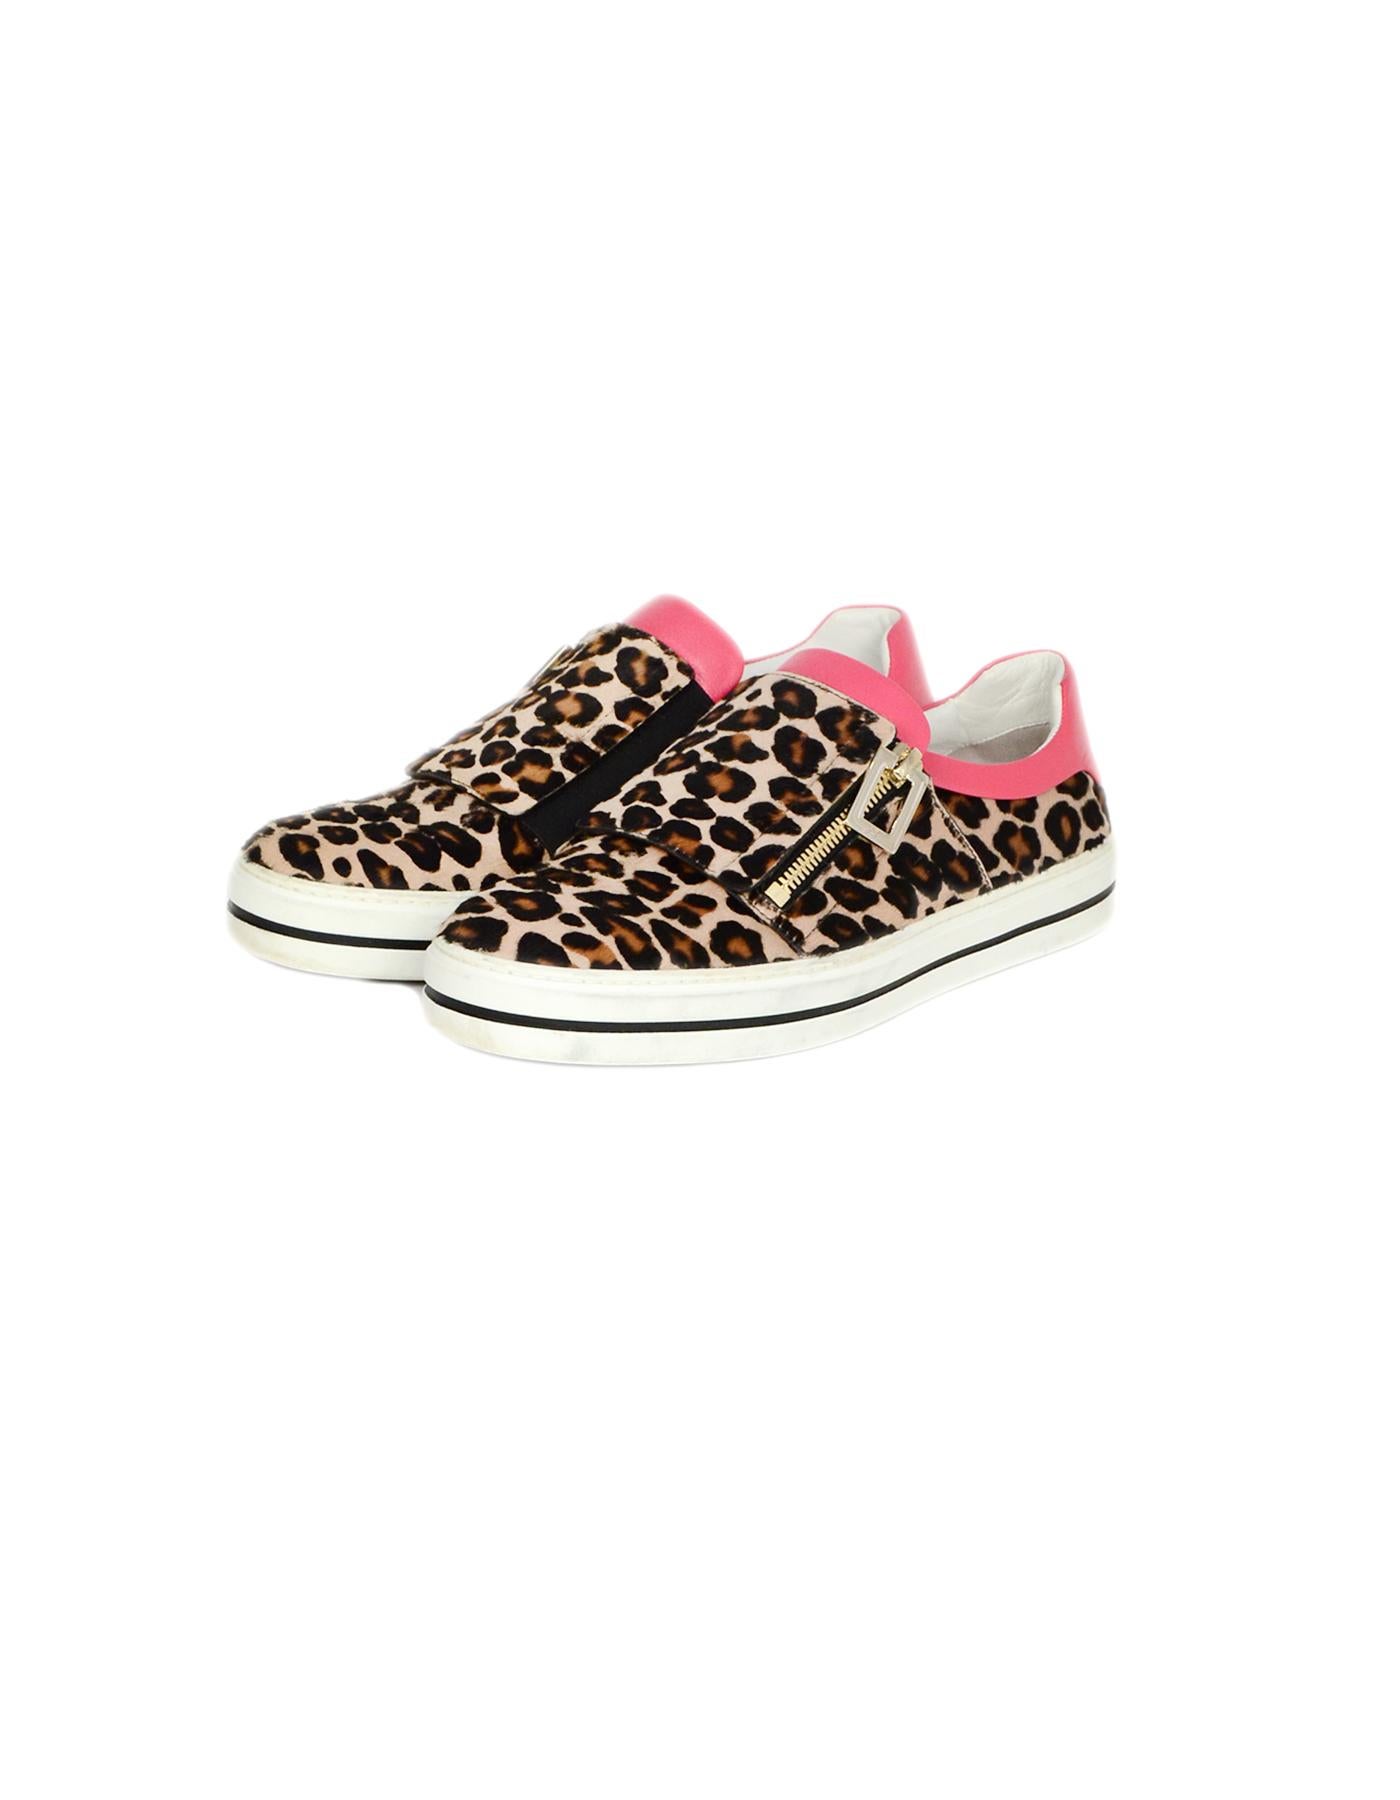 Roger Vivier Leopard Print Sneaky Viv Calf Hair Sneakers w/ Pink Leather Trim sz 38 rt $1,050

Made In: Italy
Color: Leopard print, pink
Materials: Calf hair, leather trim
Closure/Opening: Slide on 
Overall Condition: Very good pre-owned condition,